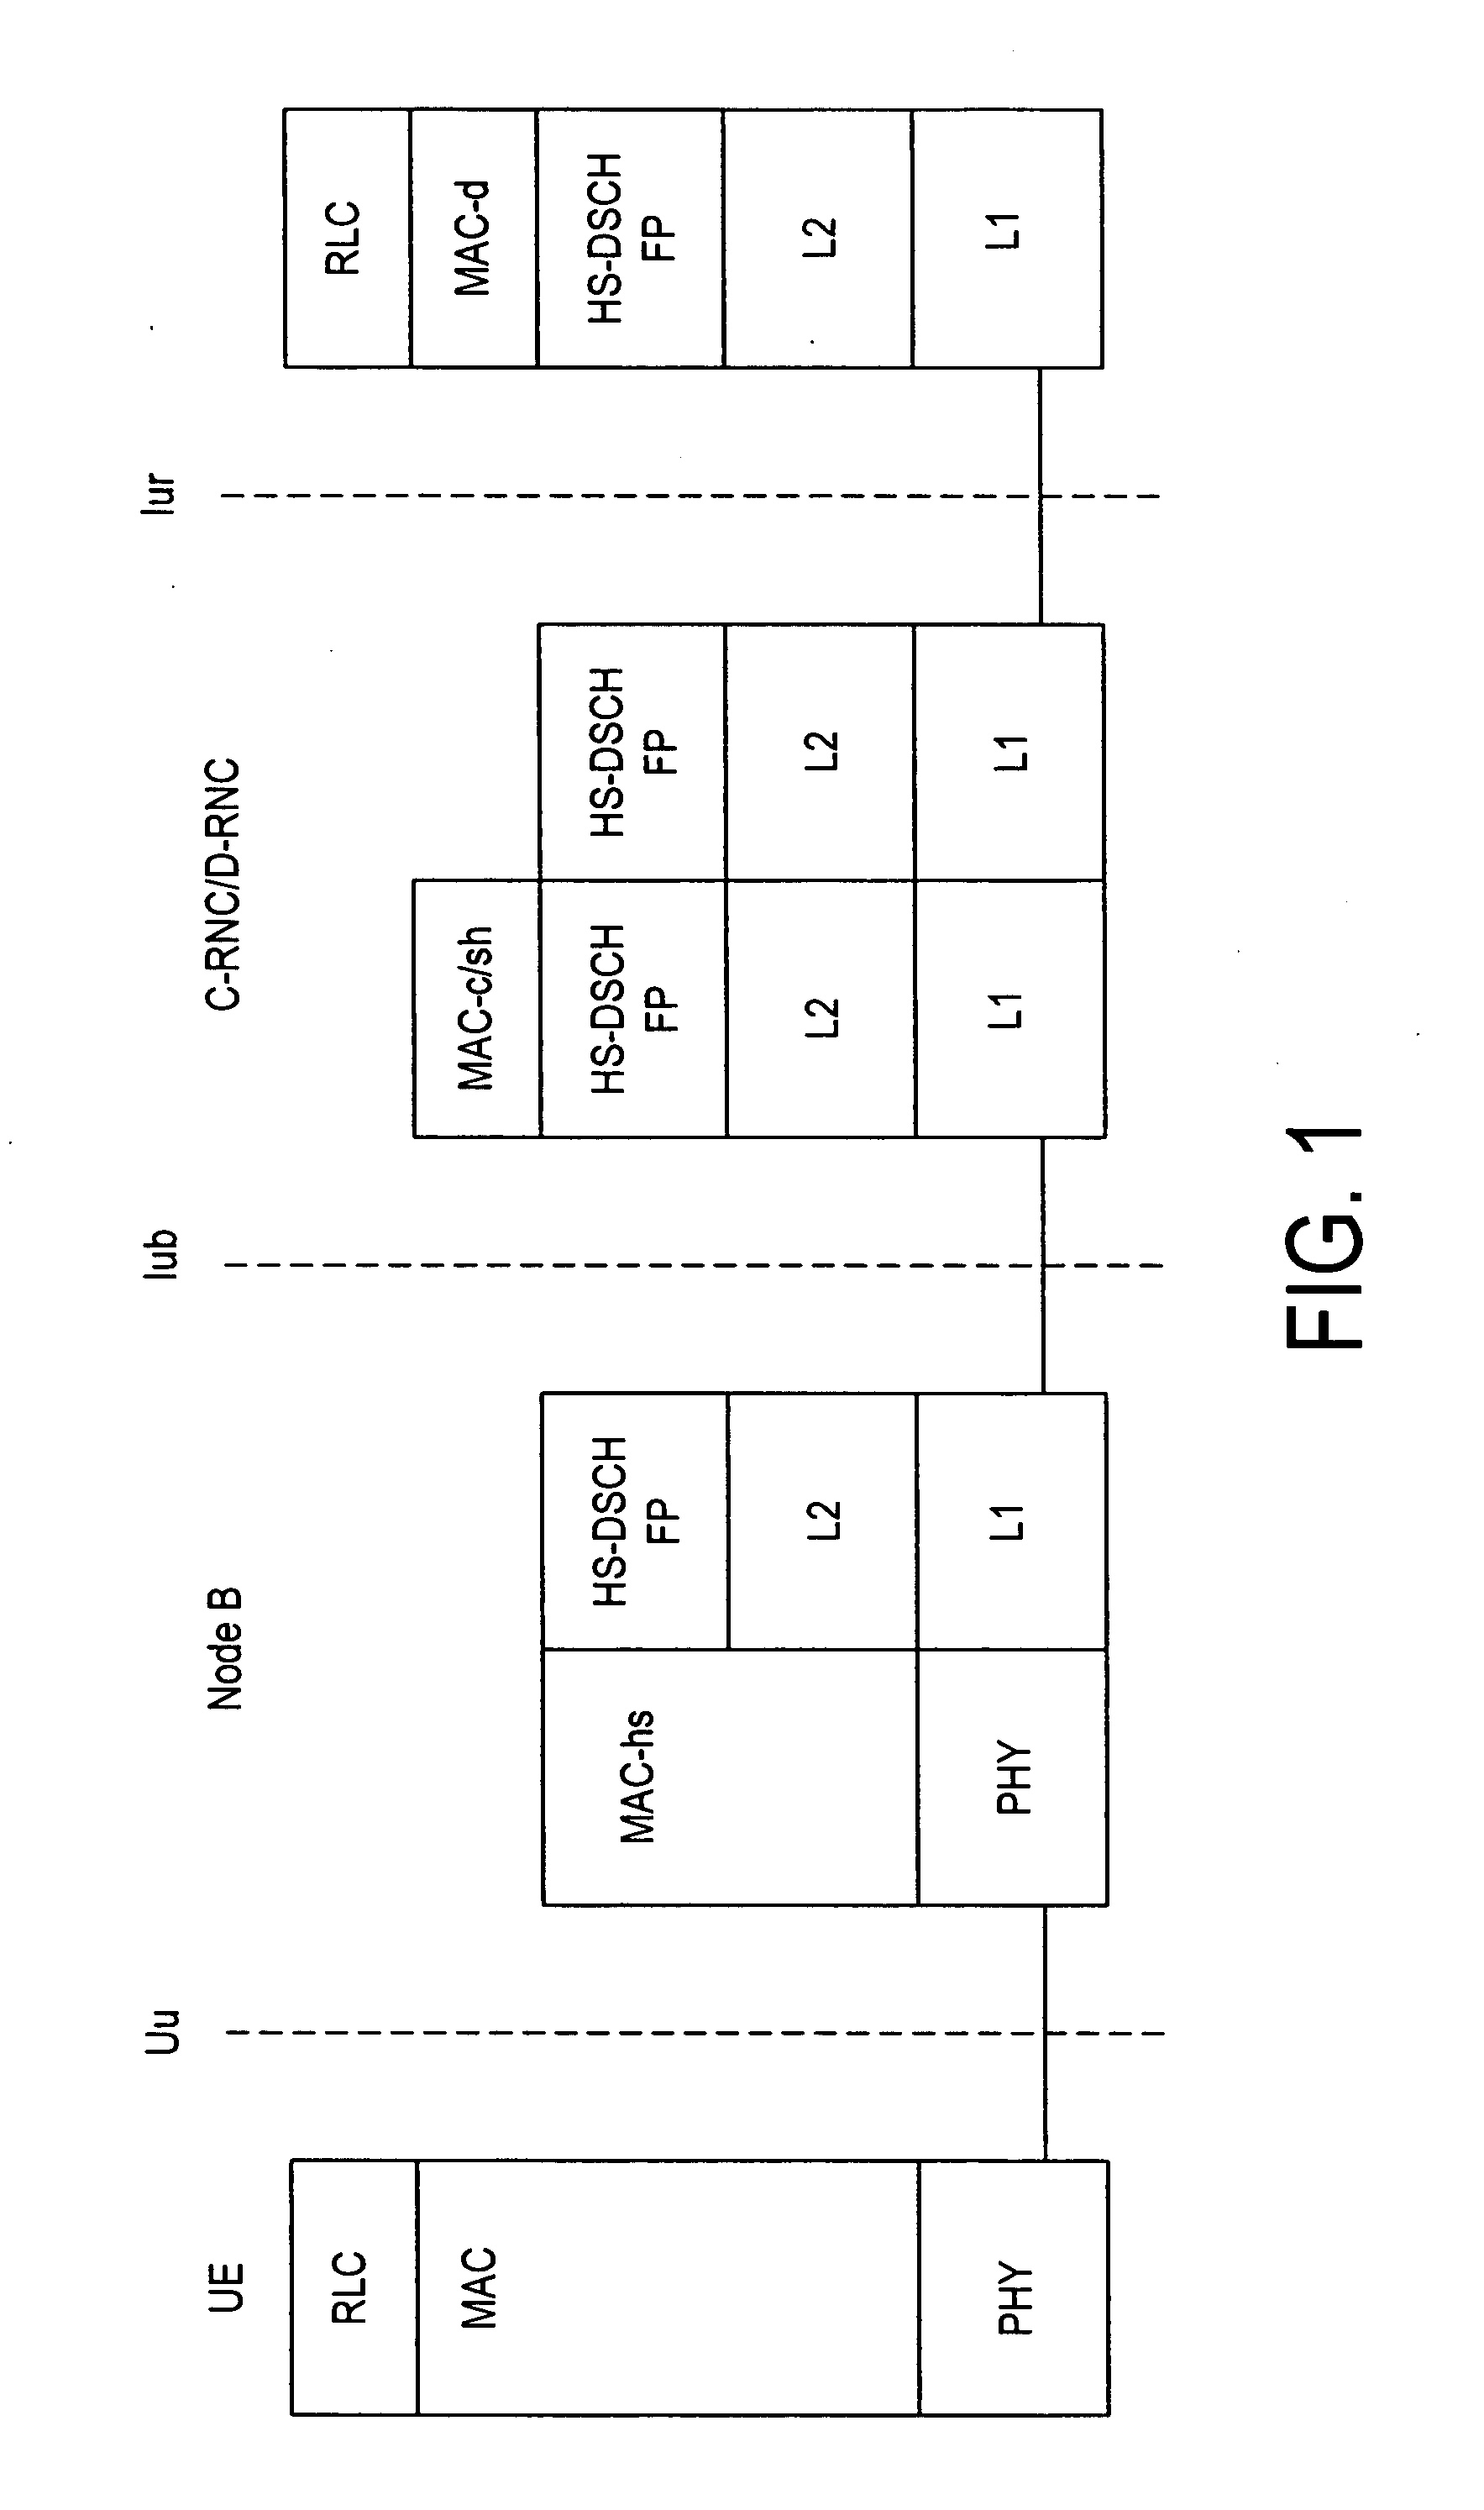 Method and apparatus for communicating protocol data unit in a radio access network